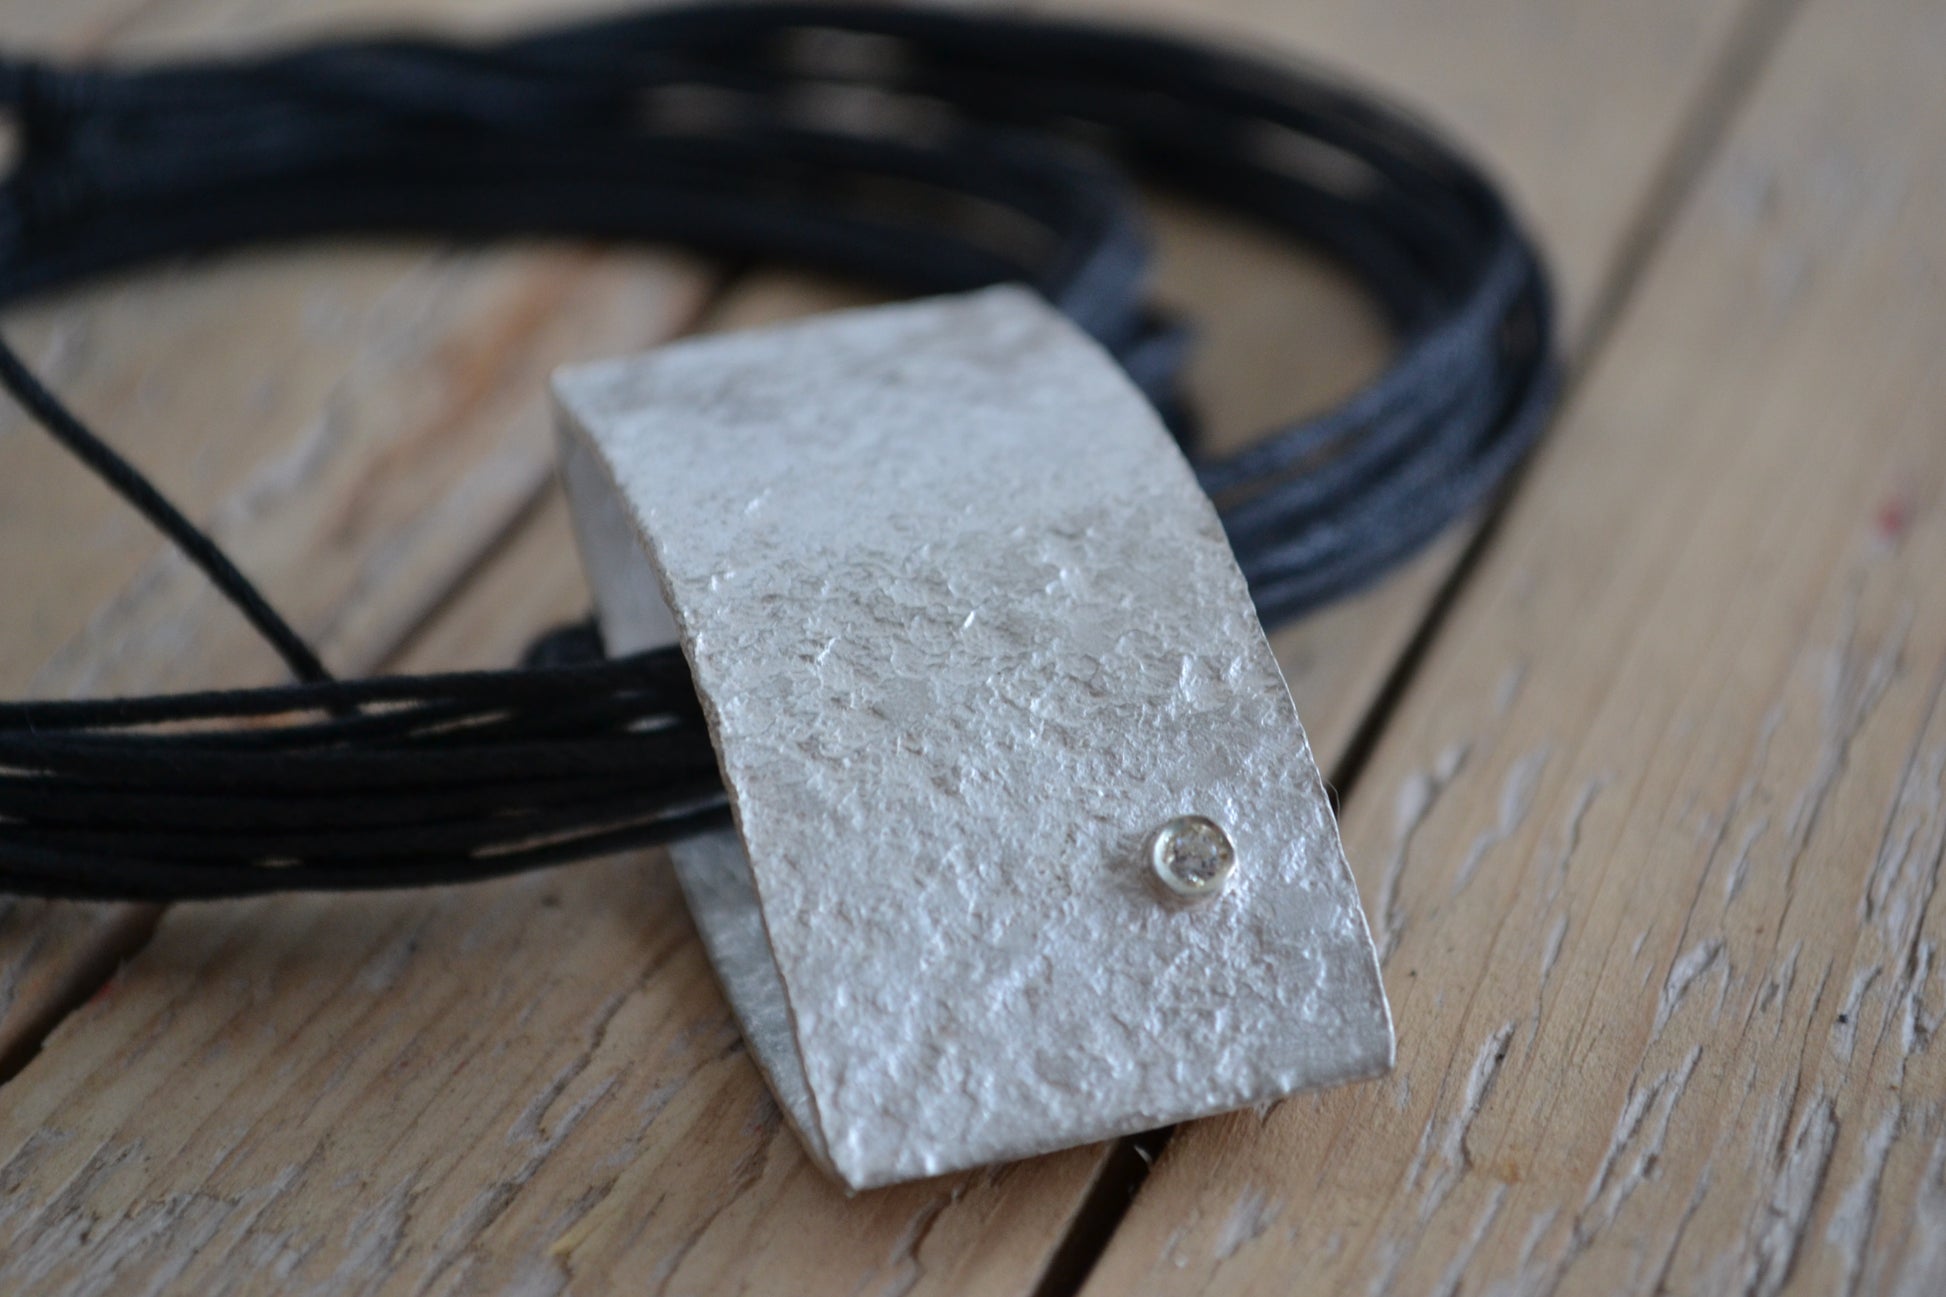 Close up of handmade silver pendant with irregular surface and small white zircon